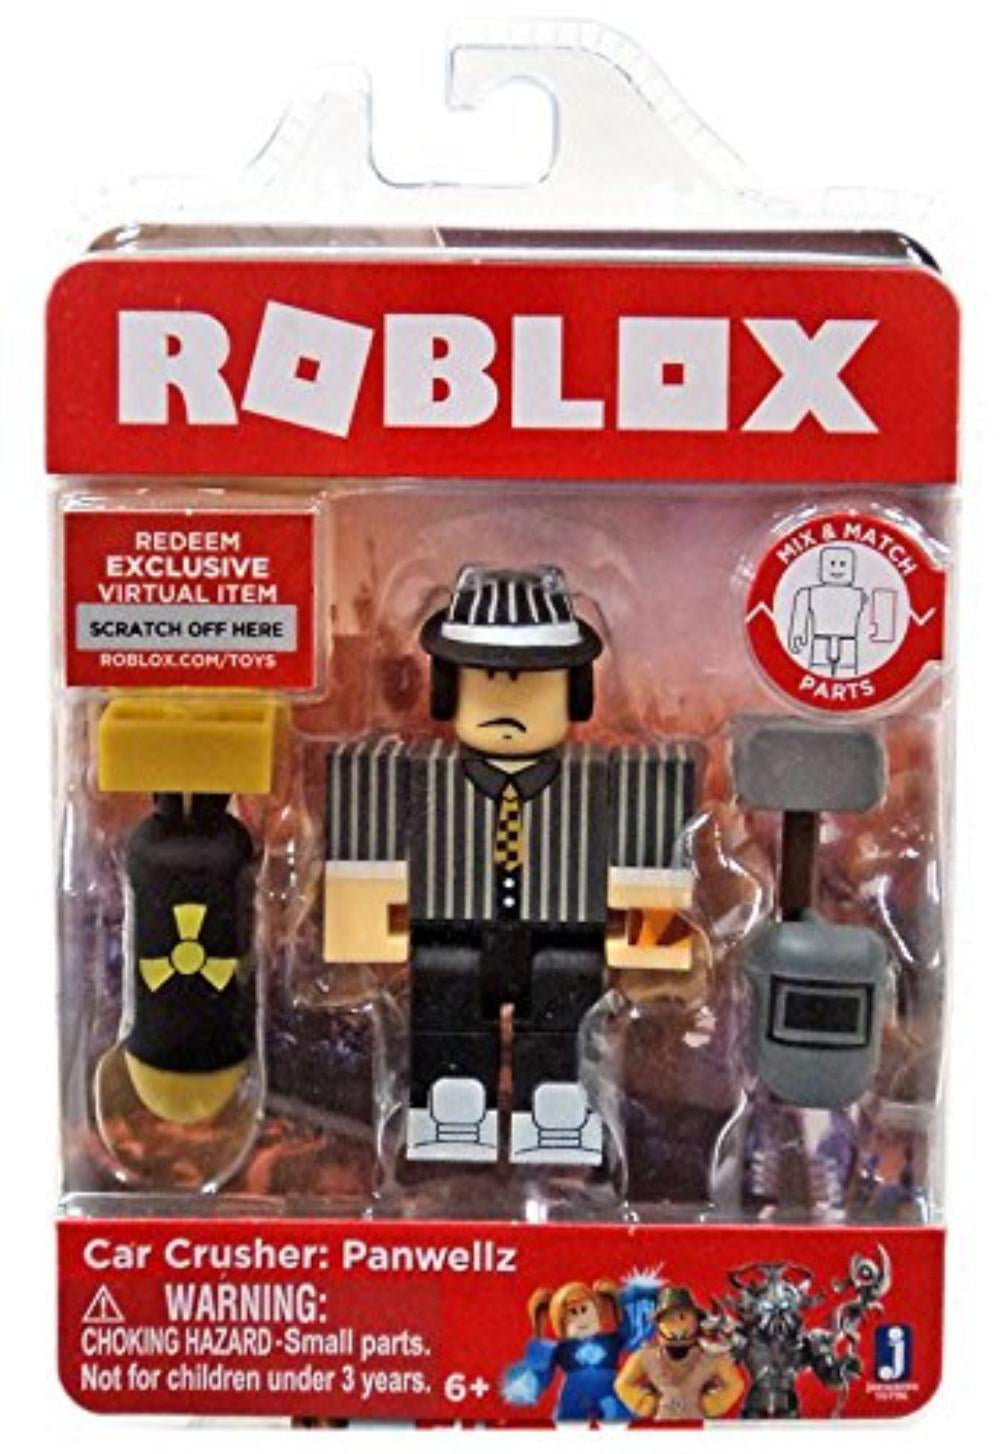 Car Crusher Panwellz Figure Pack Experience An All New Adventure With A Legendary Character From The World Of Roblox By Roblox Walmart Com Walmart Com - roblox car crusher panwellz action figure